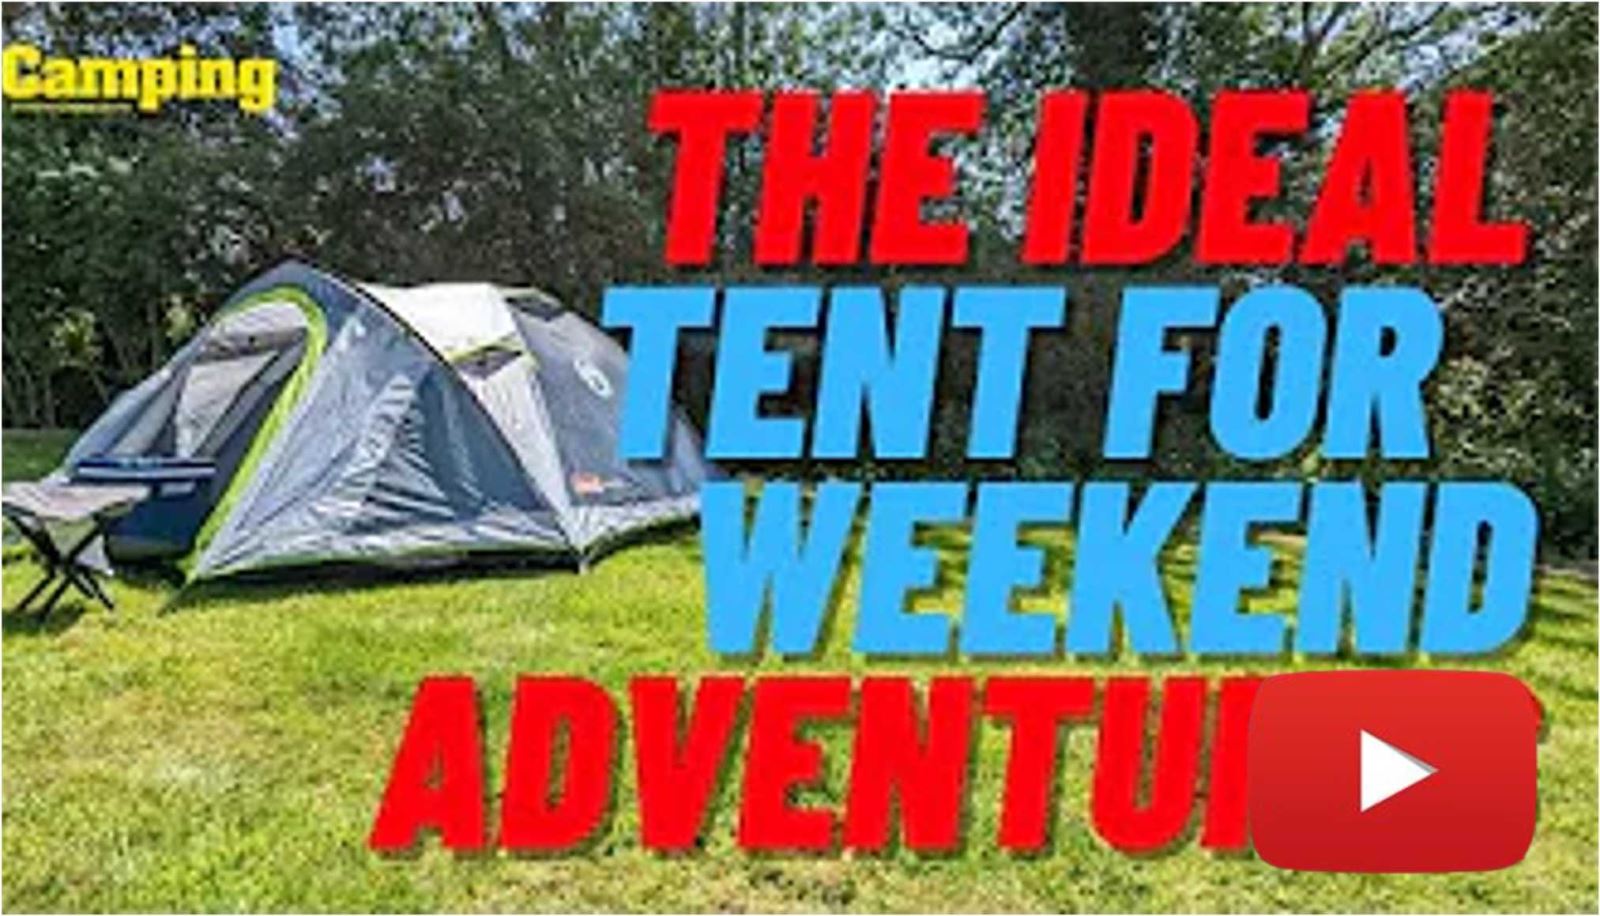 An ideal tent for weekend adventures